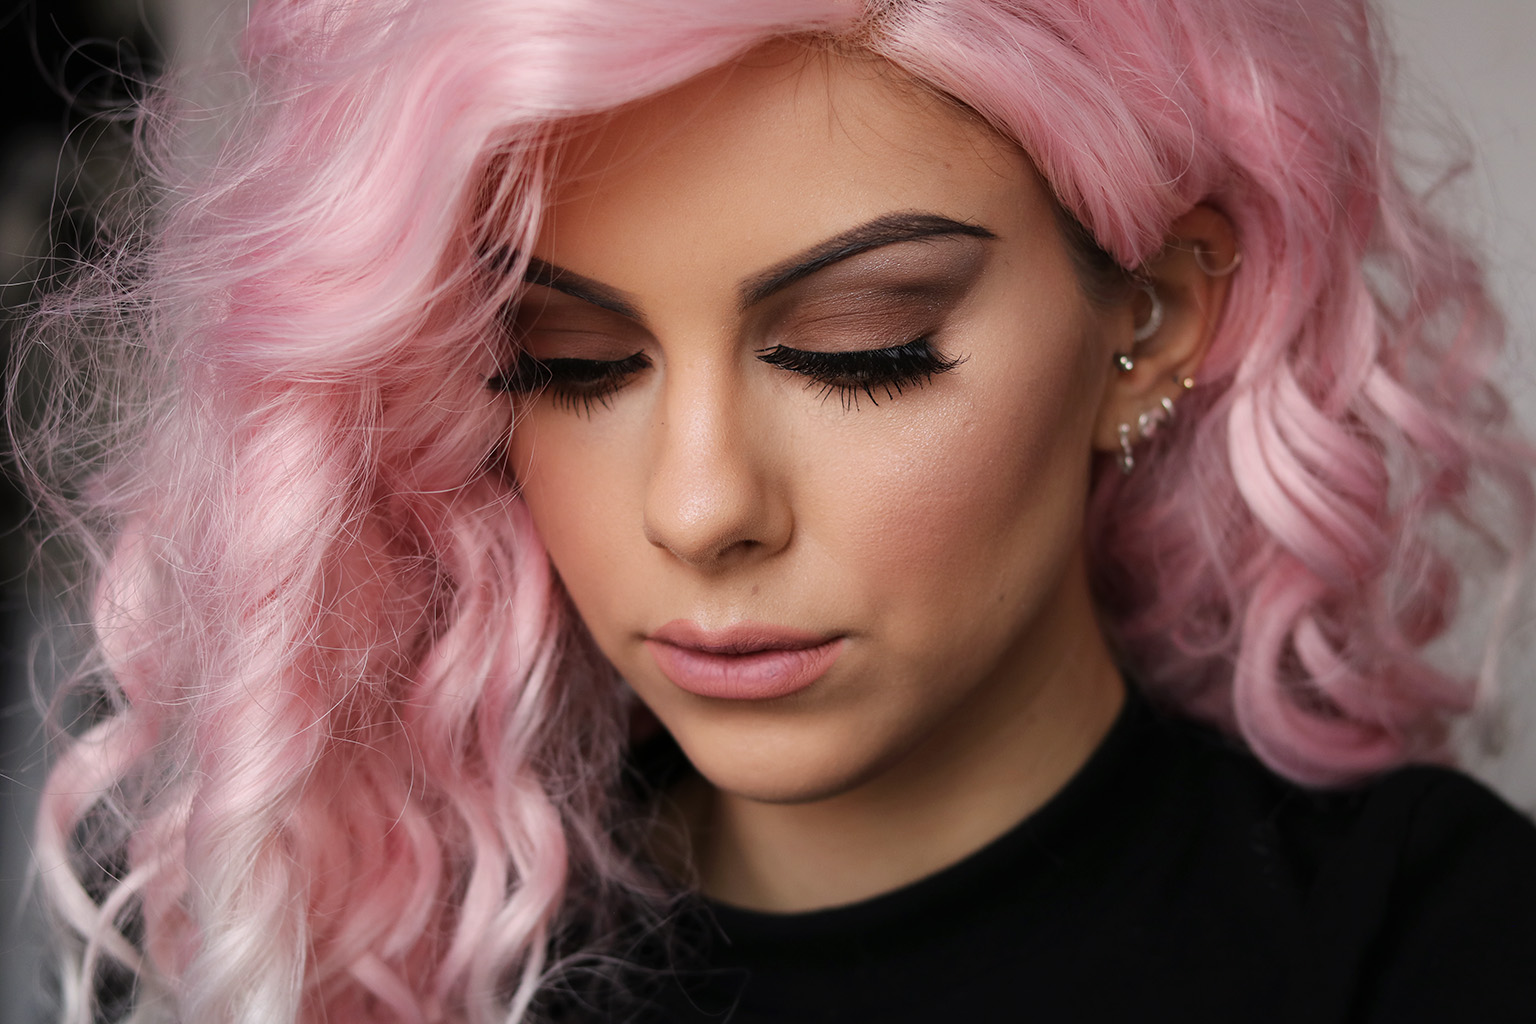 sophie hannah richardson creates a kylie jenner makeup look with pink wig